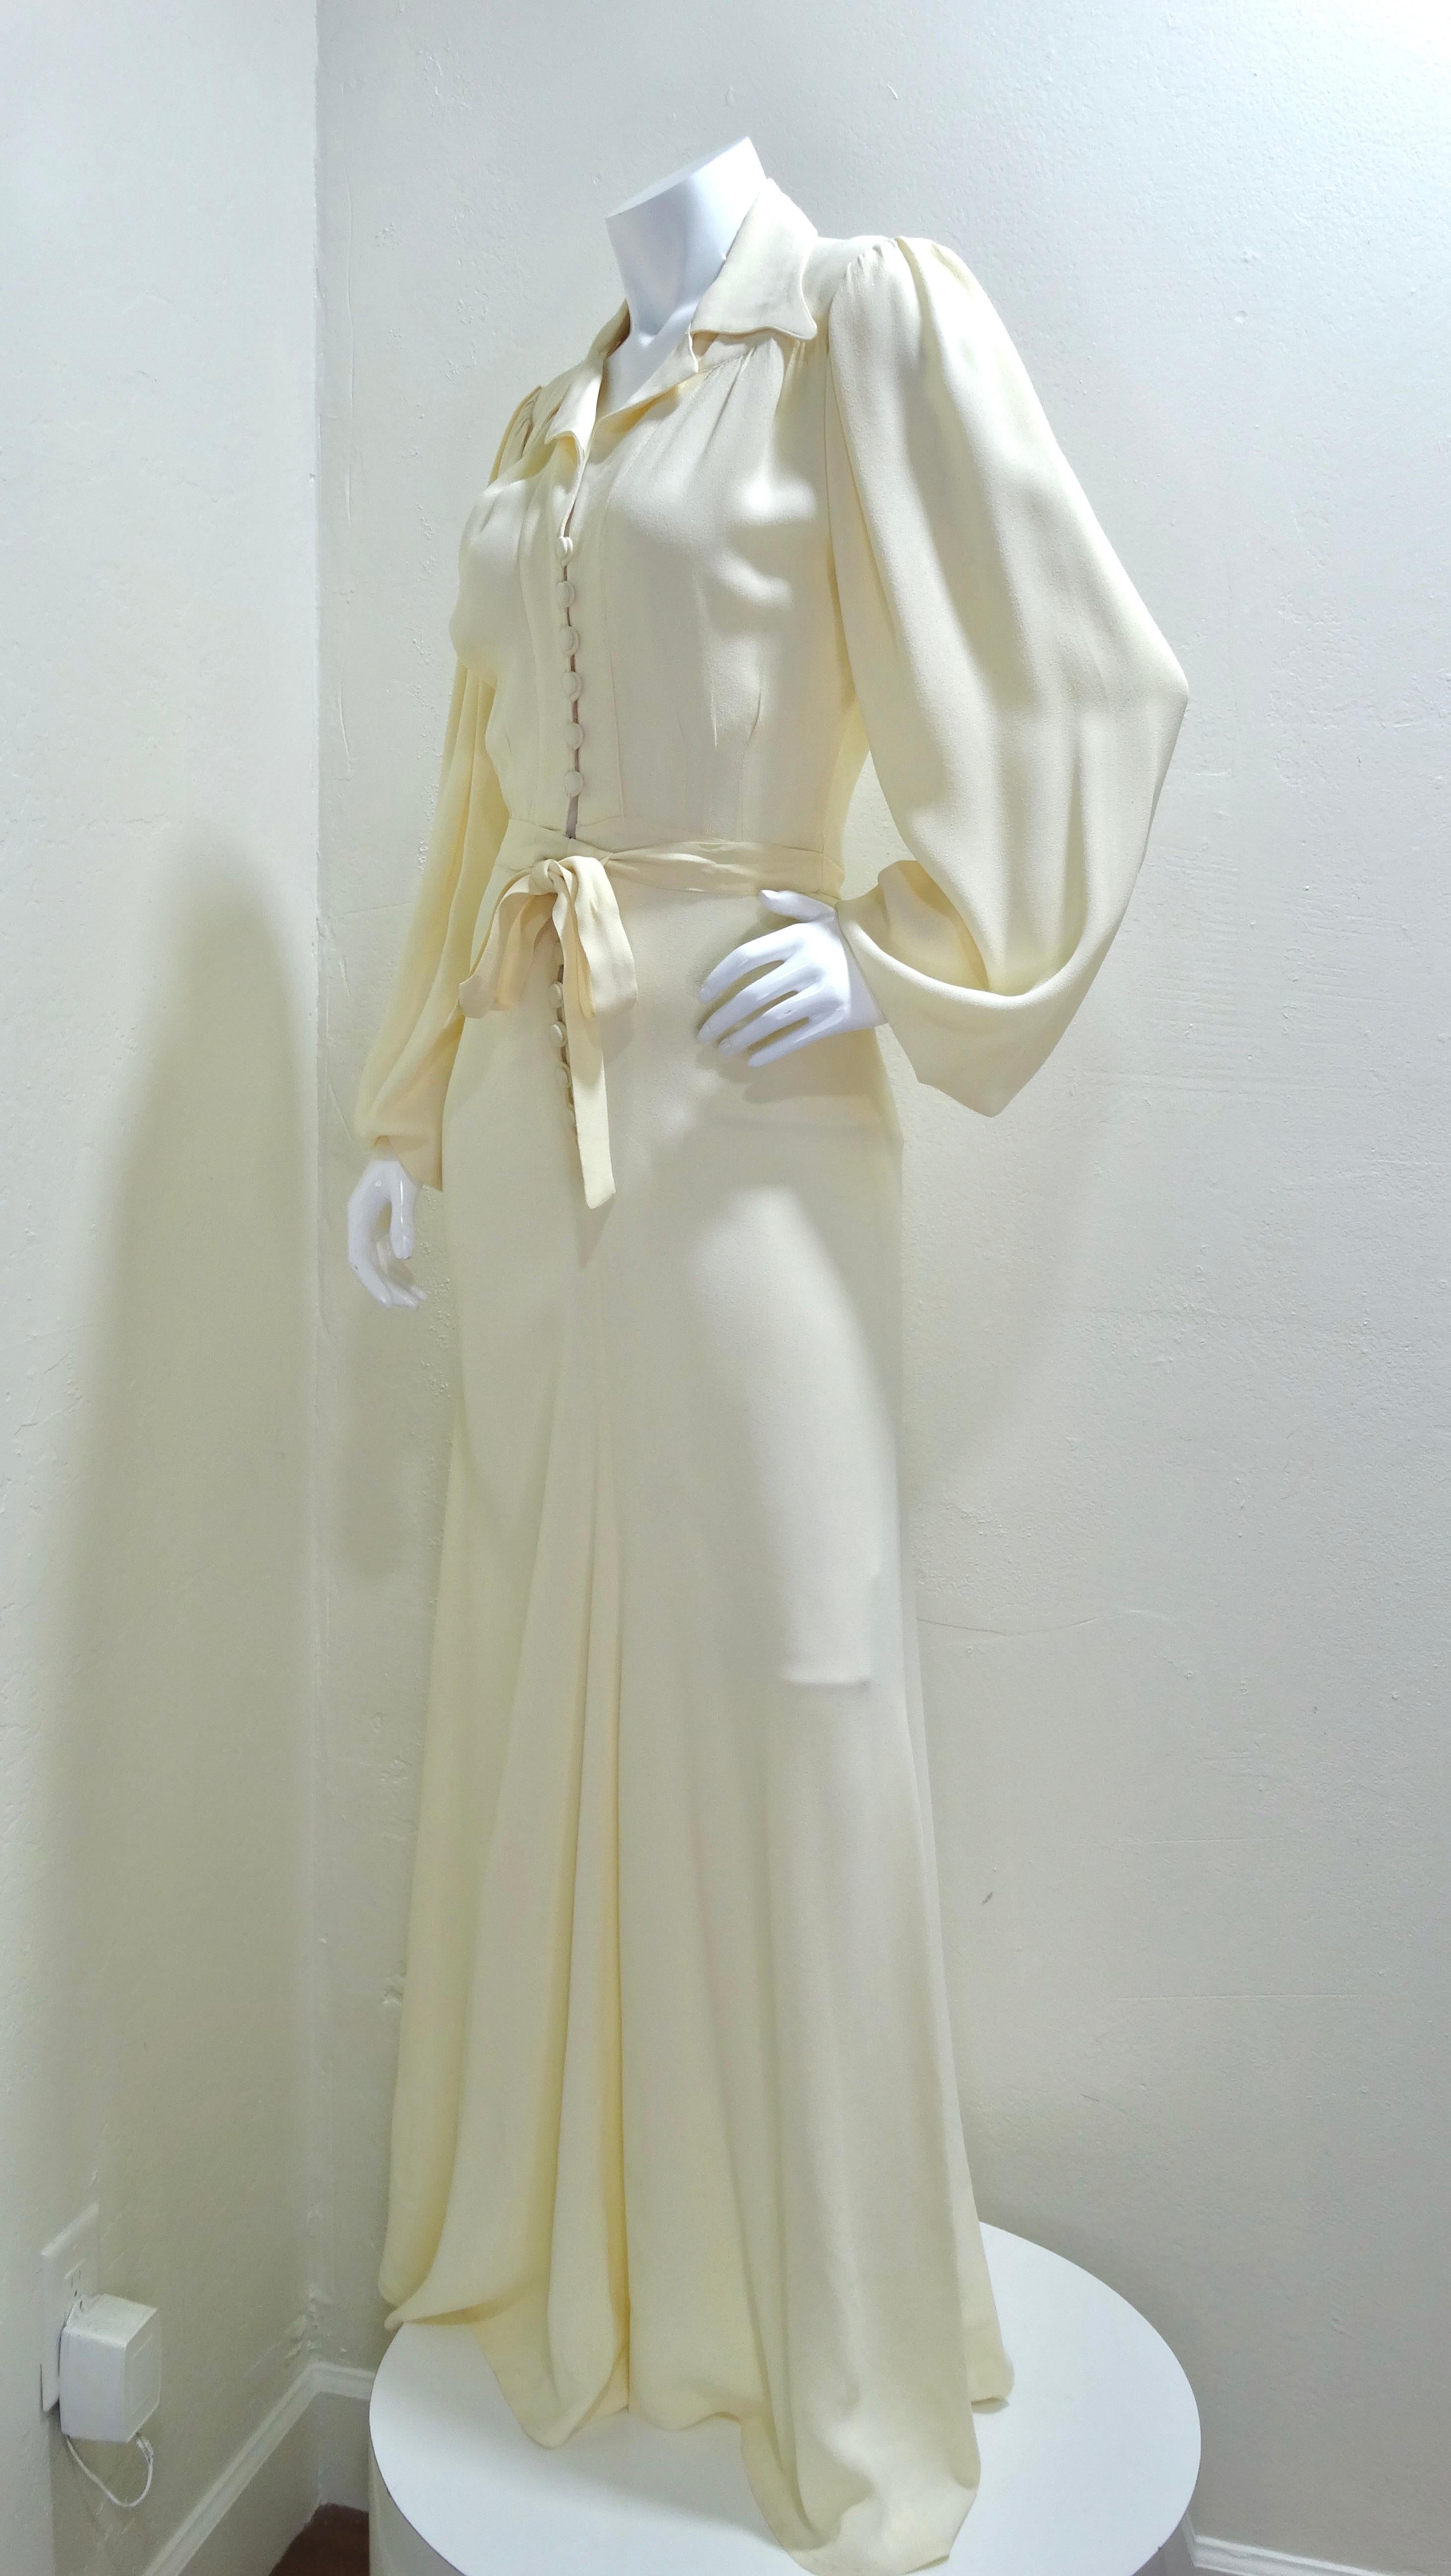 This Ossie Clark maxi-dress has a certain romance and timelessness about it. Made in the 1970's and composed of cream moss crepe in a maxi-length. The dress buttons up the front for a flattering and pinched waist and an exaggerated collar and